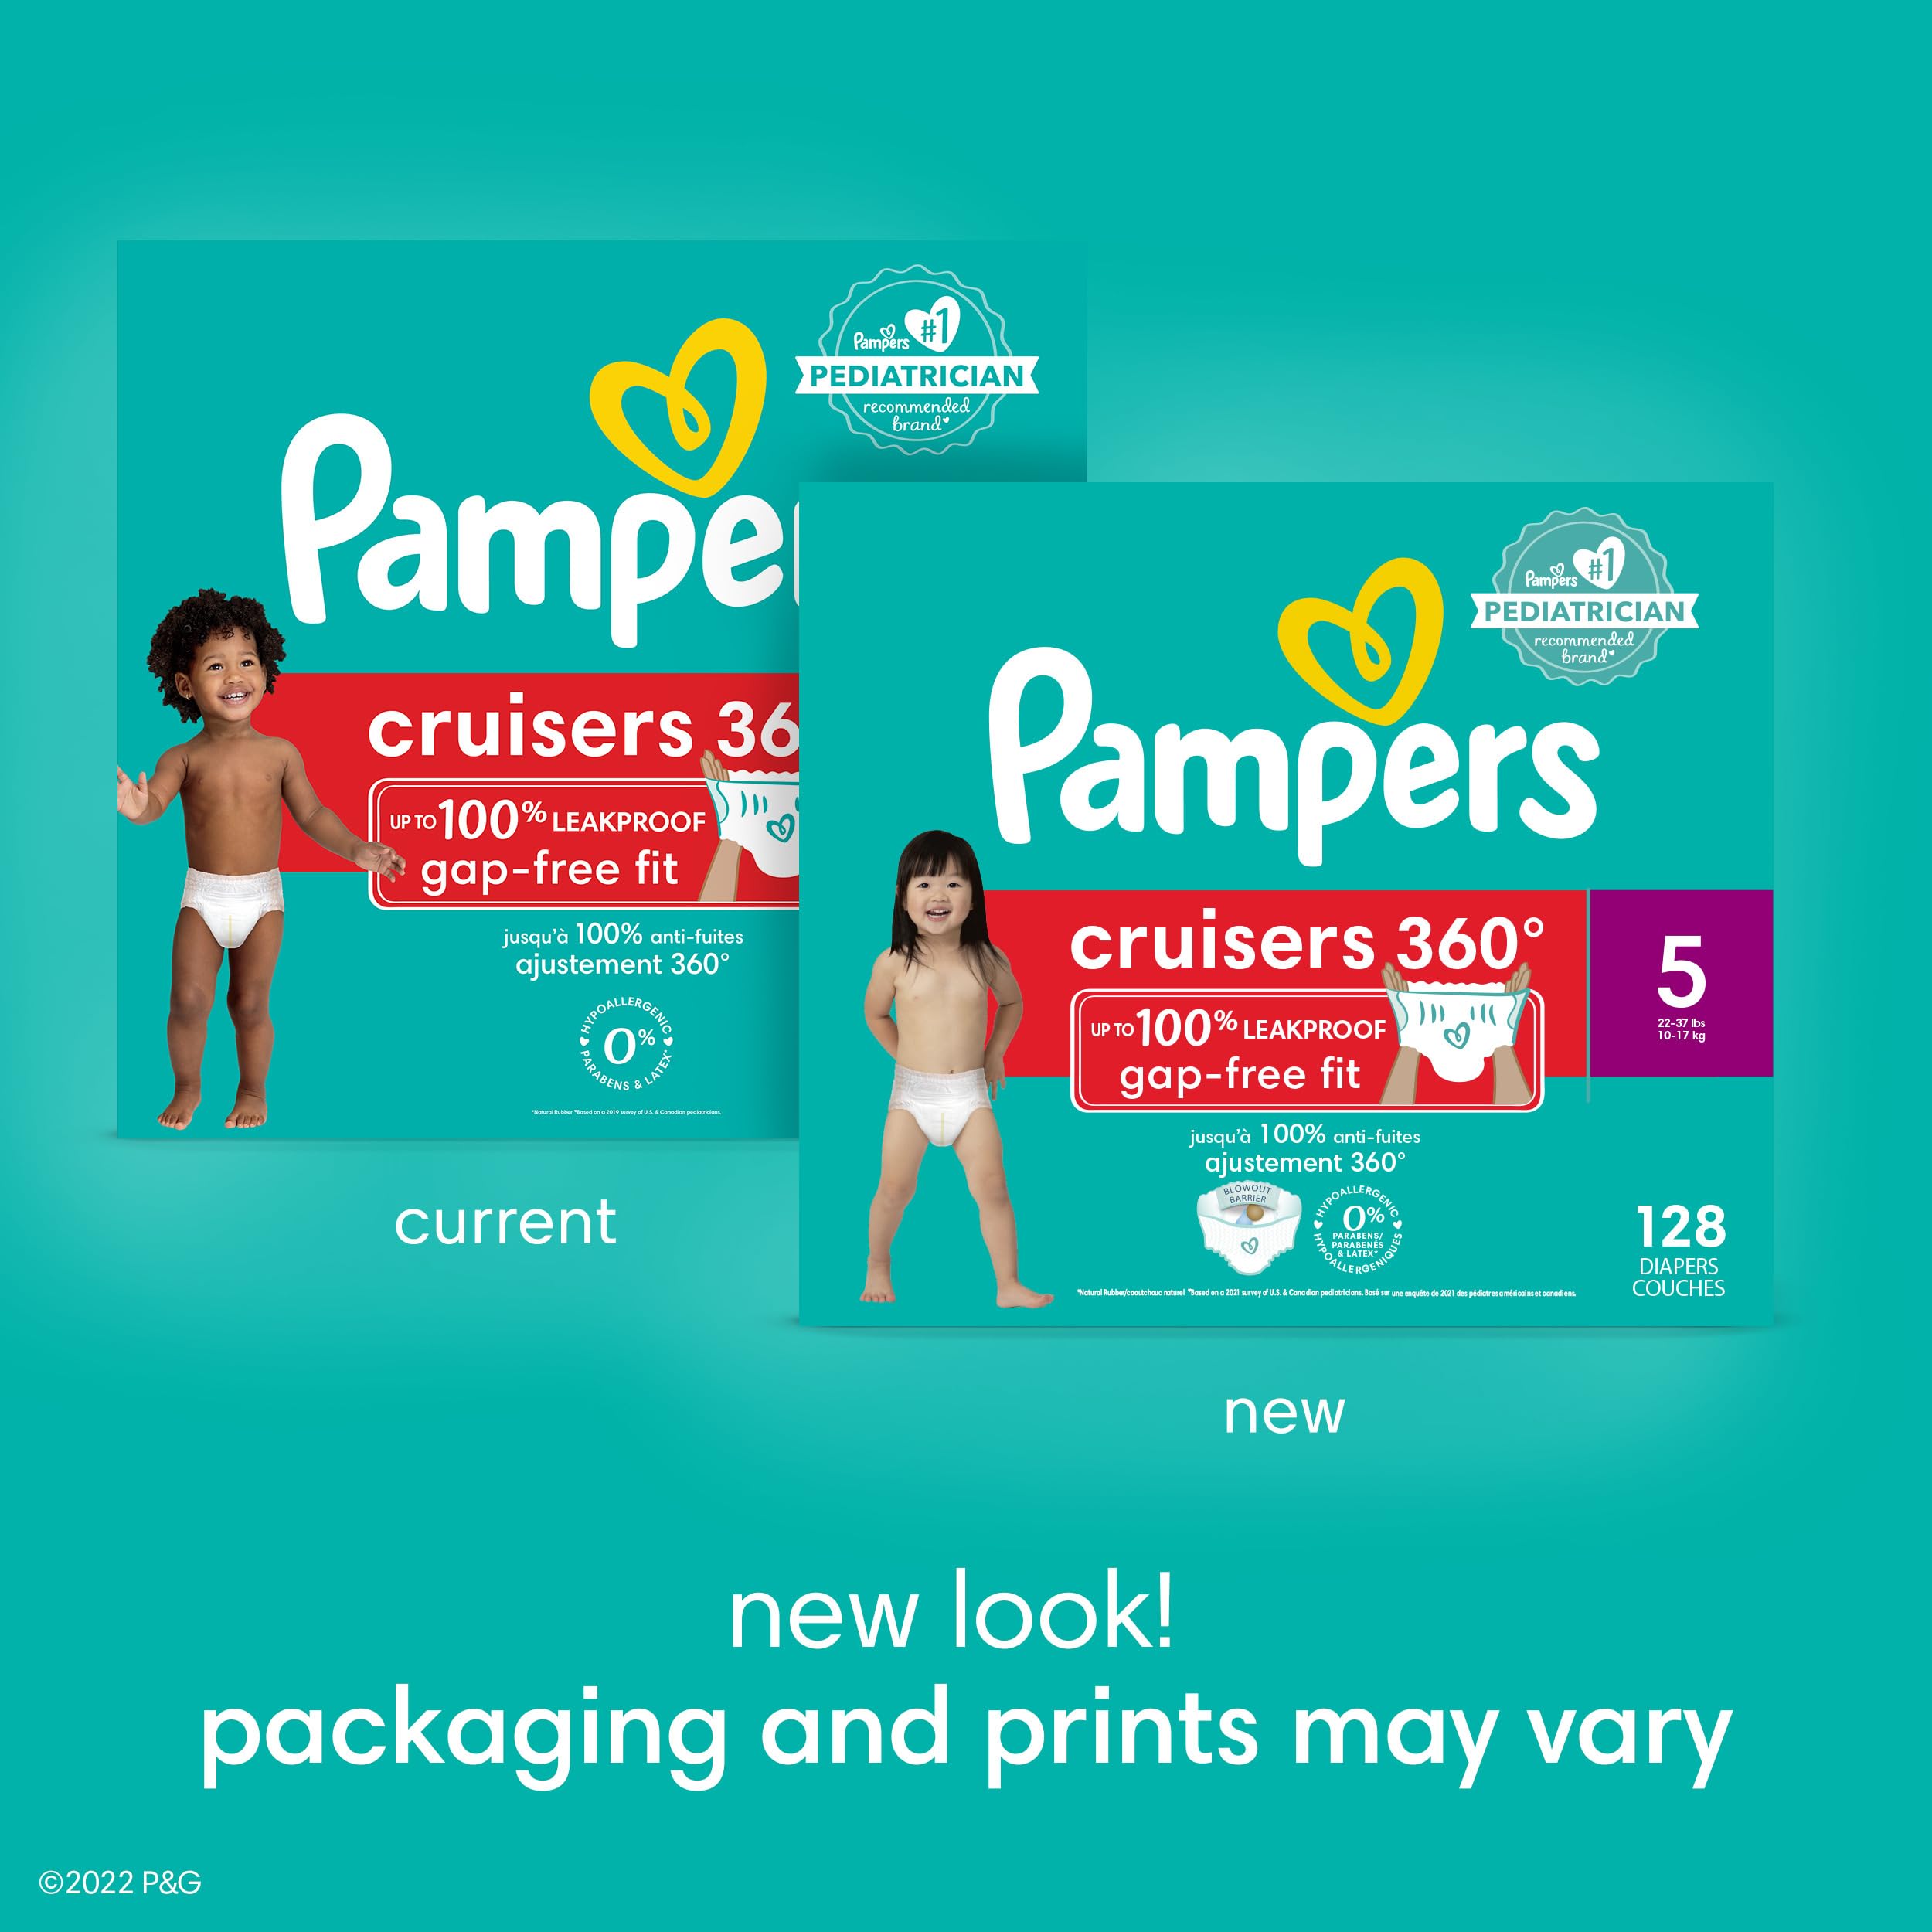 Pampers Cruisers 360 Diapers - Size 7, 70 Count, Pull-On Disposable Baby Diapers, Gap-Free Fit